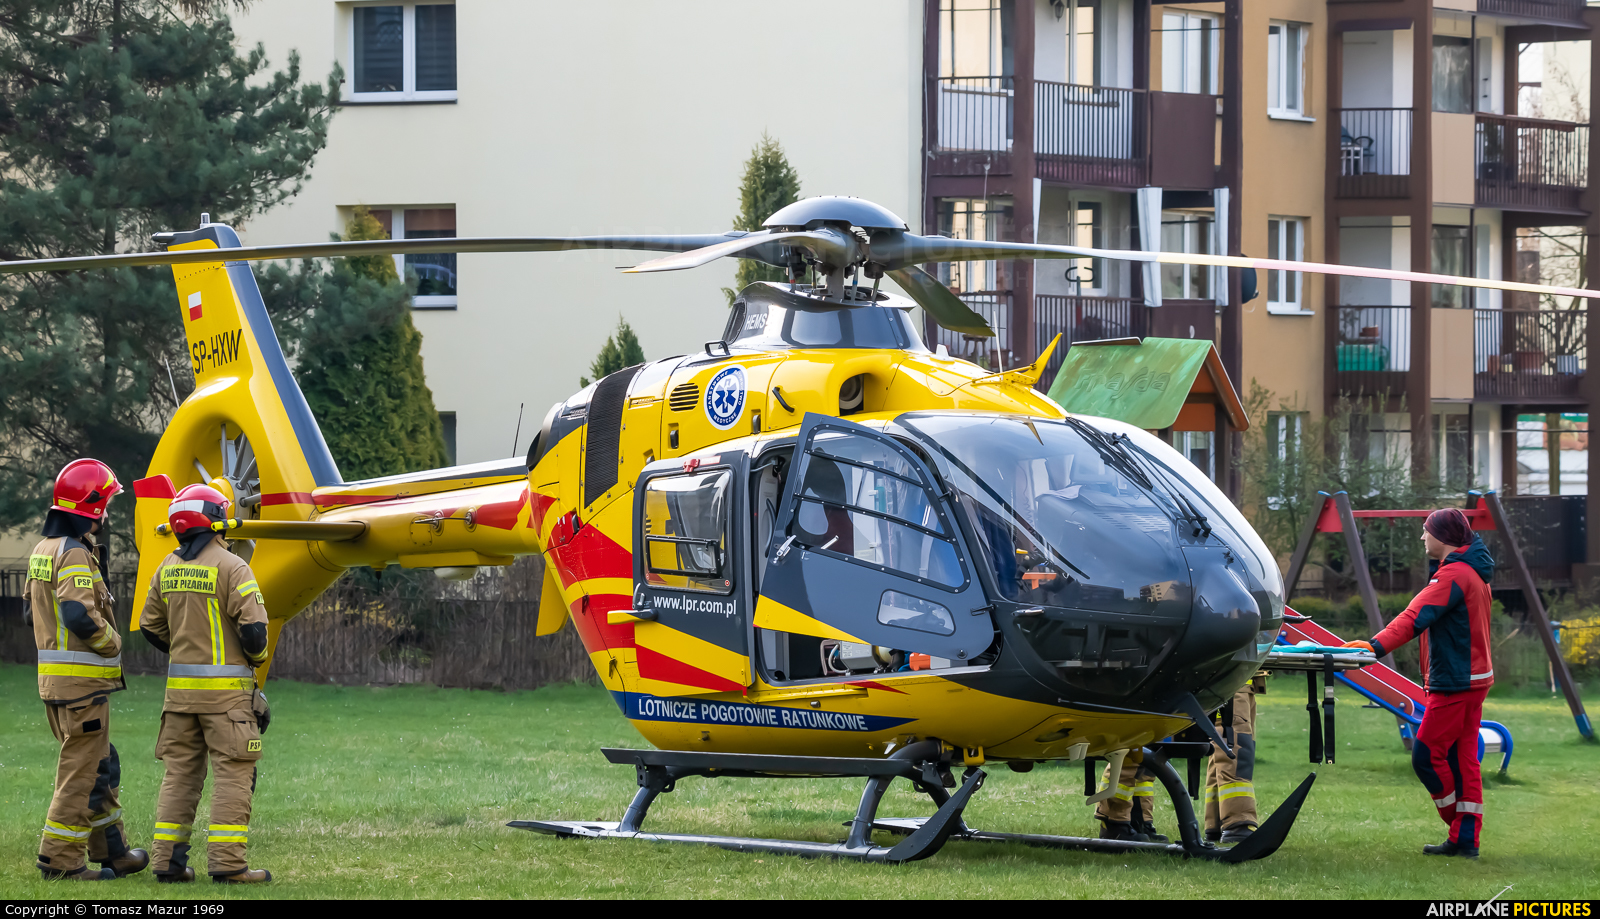 Polish Medical Air Rescue - Lotnicze Pogotowie Ratunkowe SP-HXW aircraft at Off Airport - Poland